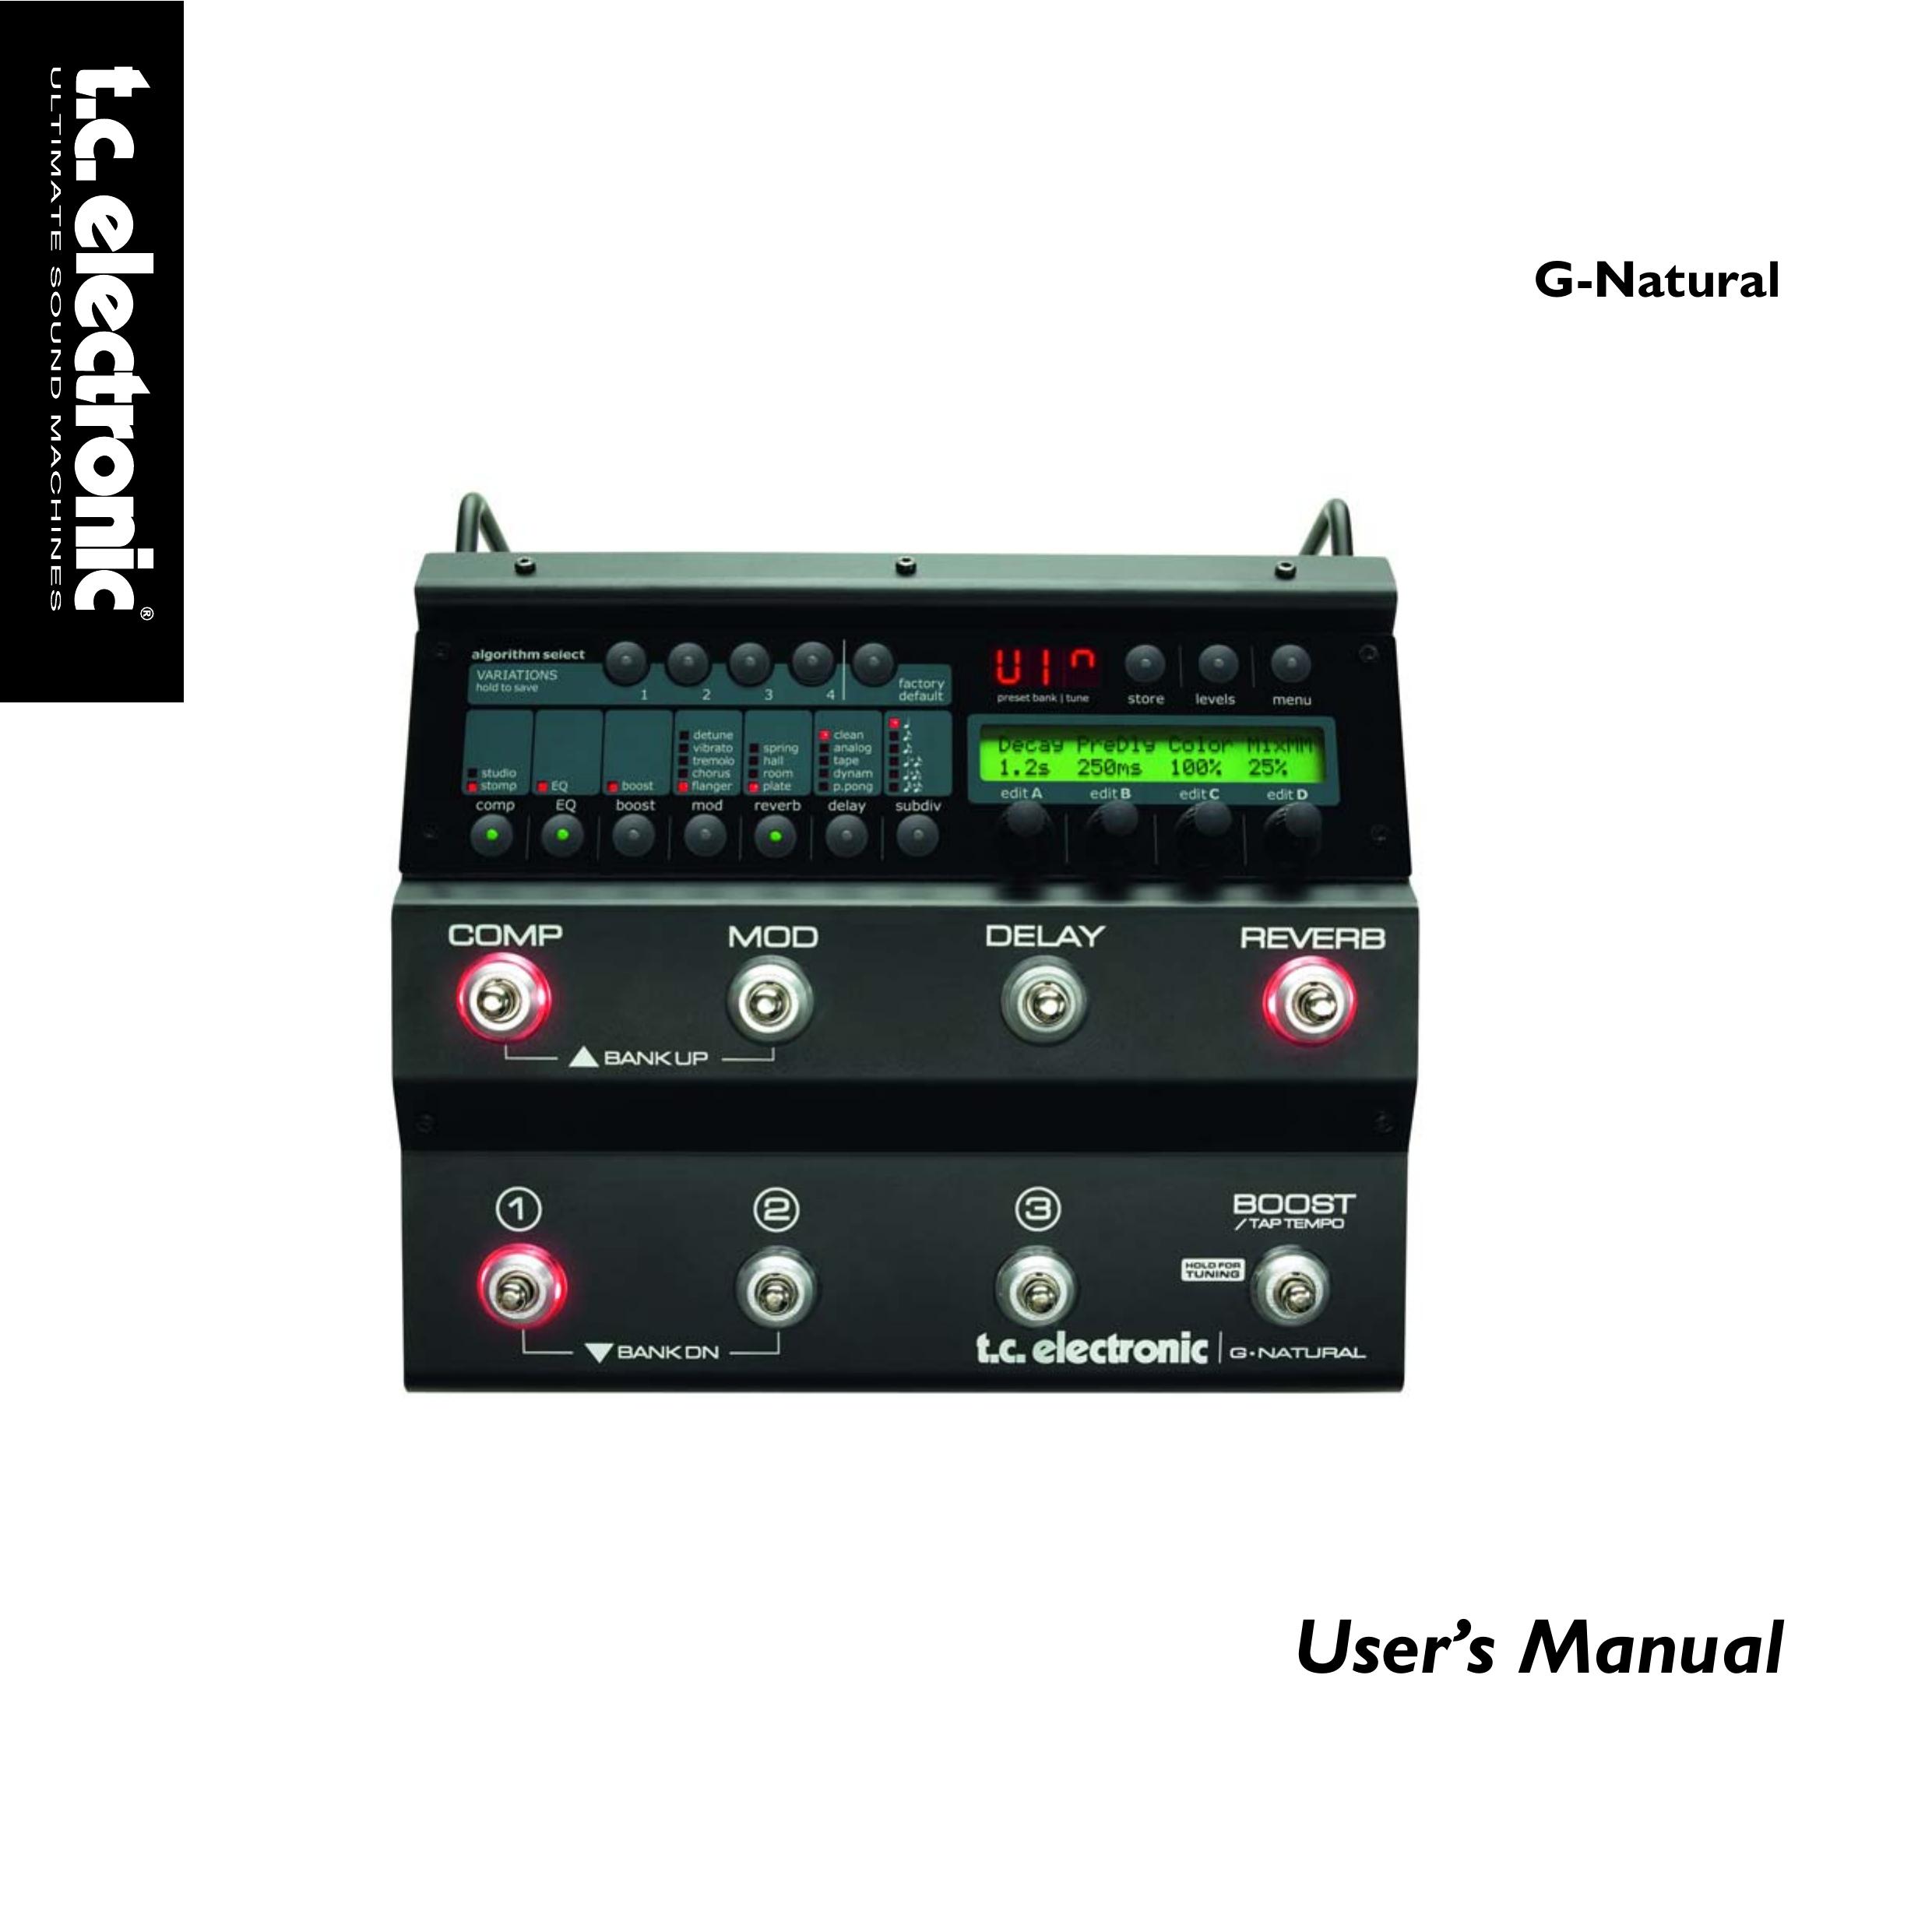 TC electronic SDN BHD G-Natural Musical Instrument Amplifier User Manual